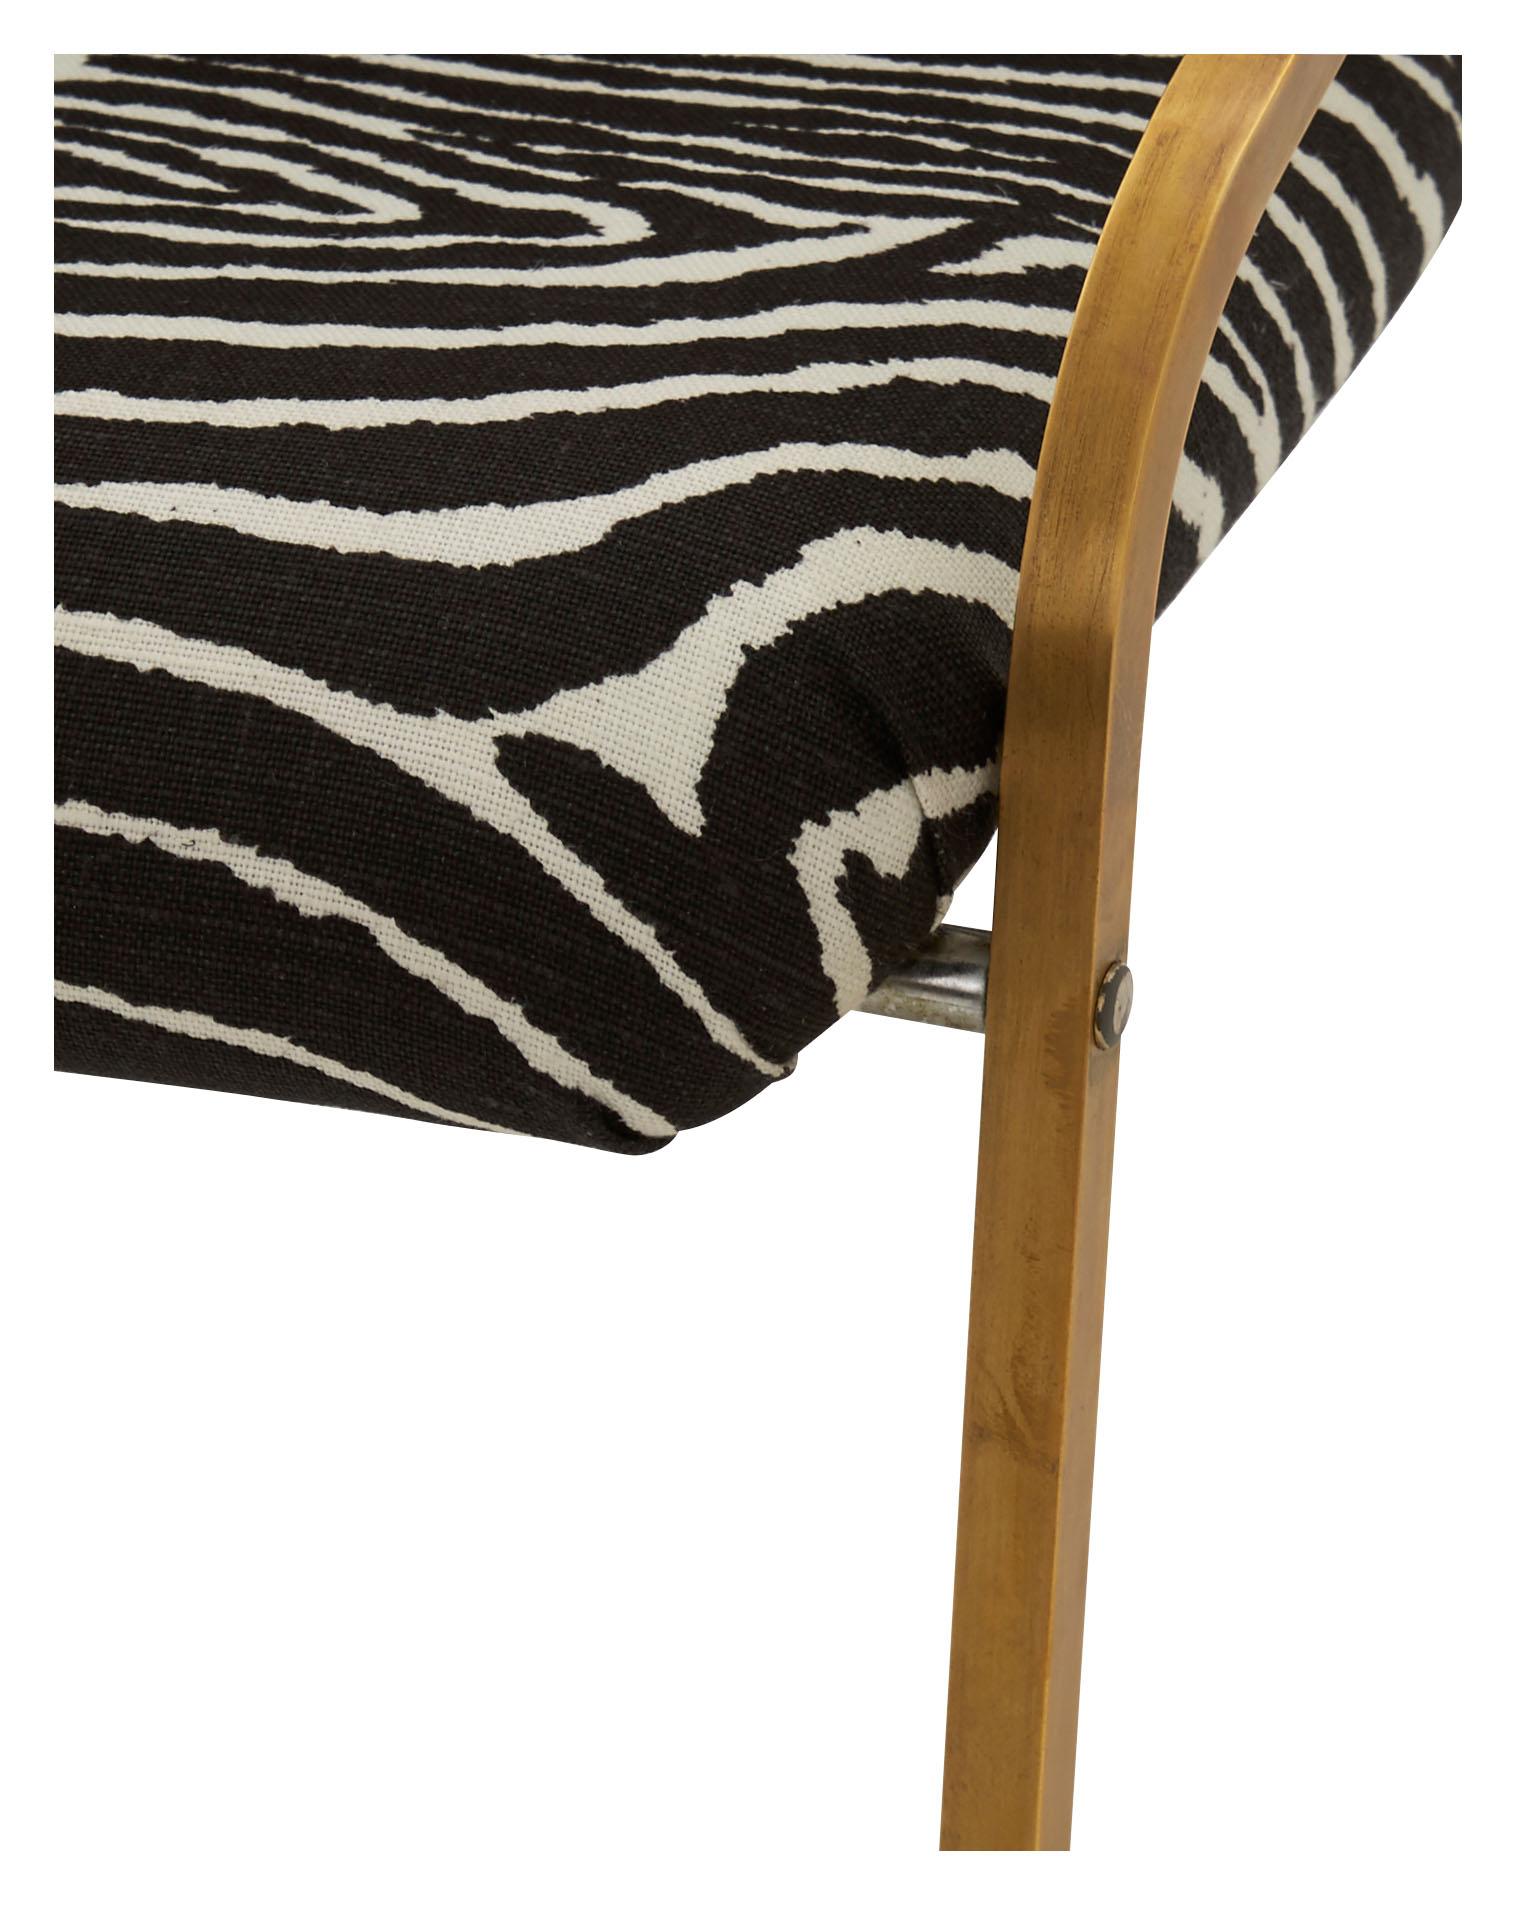 Mid-Century Modern Midcentury Brass Willy Rizzo Dining Chair Upholstered in Zebra Print Linen